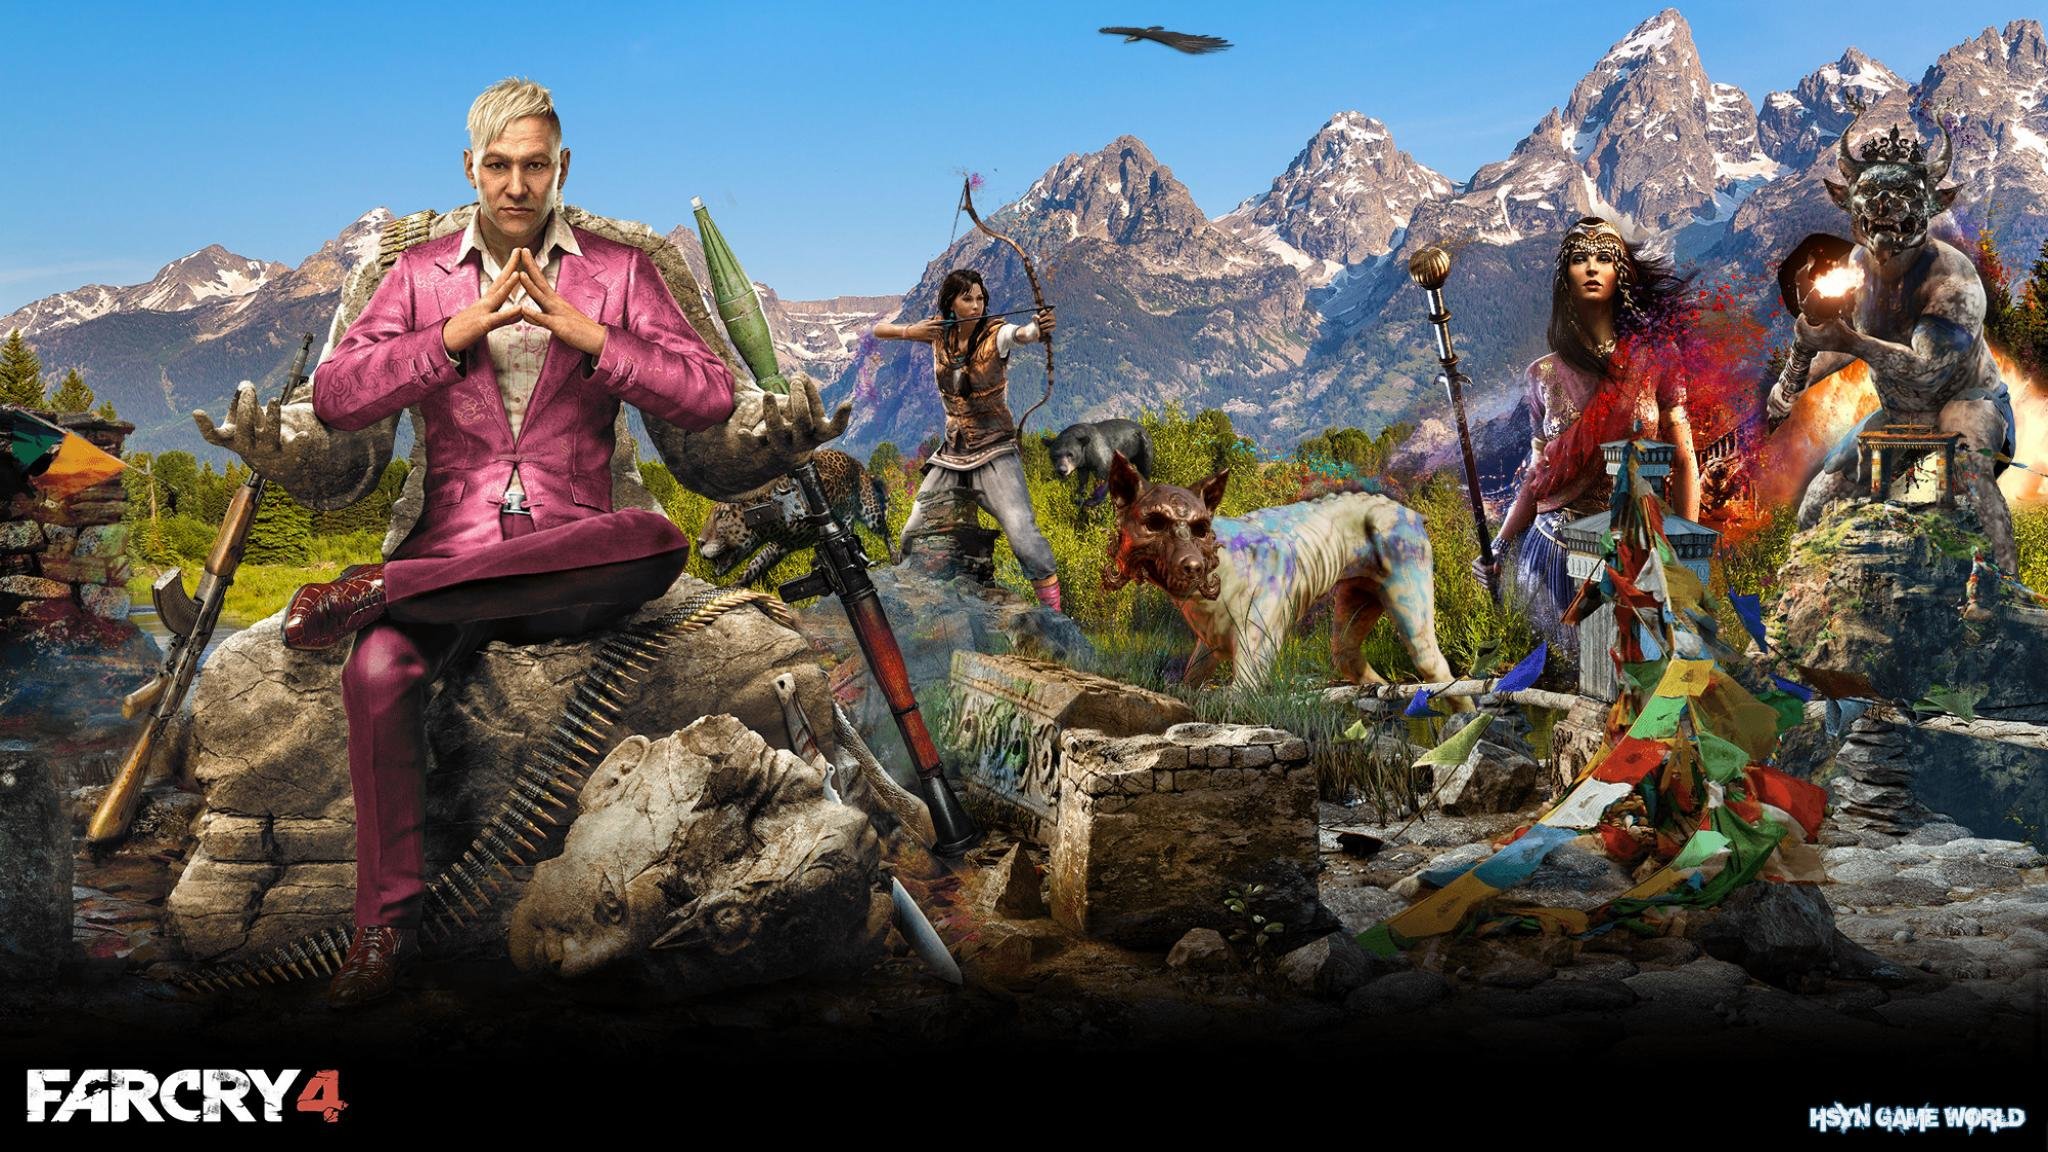 Download hd 2048x1152 Far Cry 4 desktop background ID:10670 for free